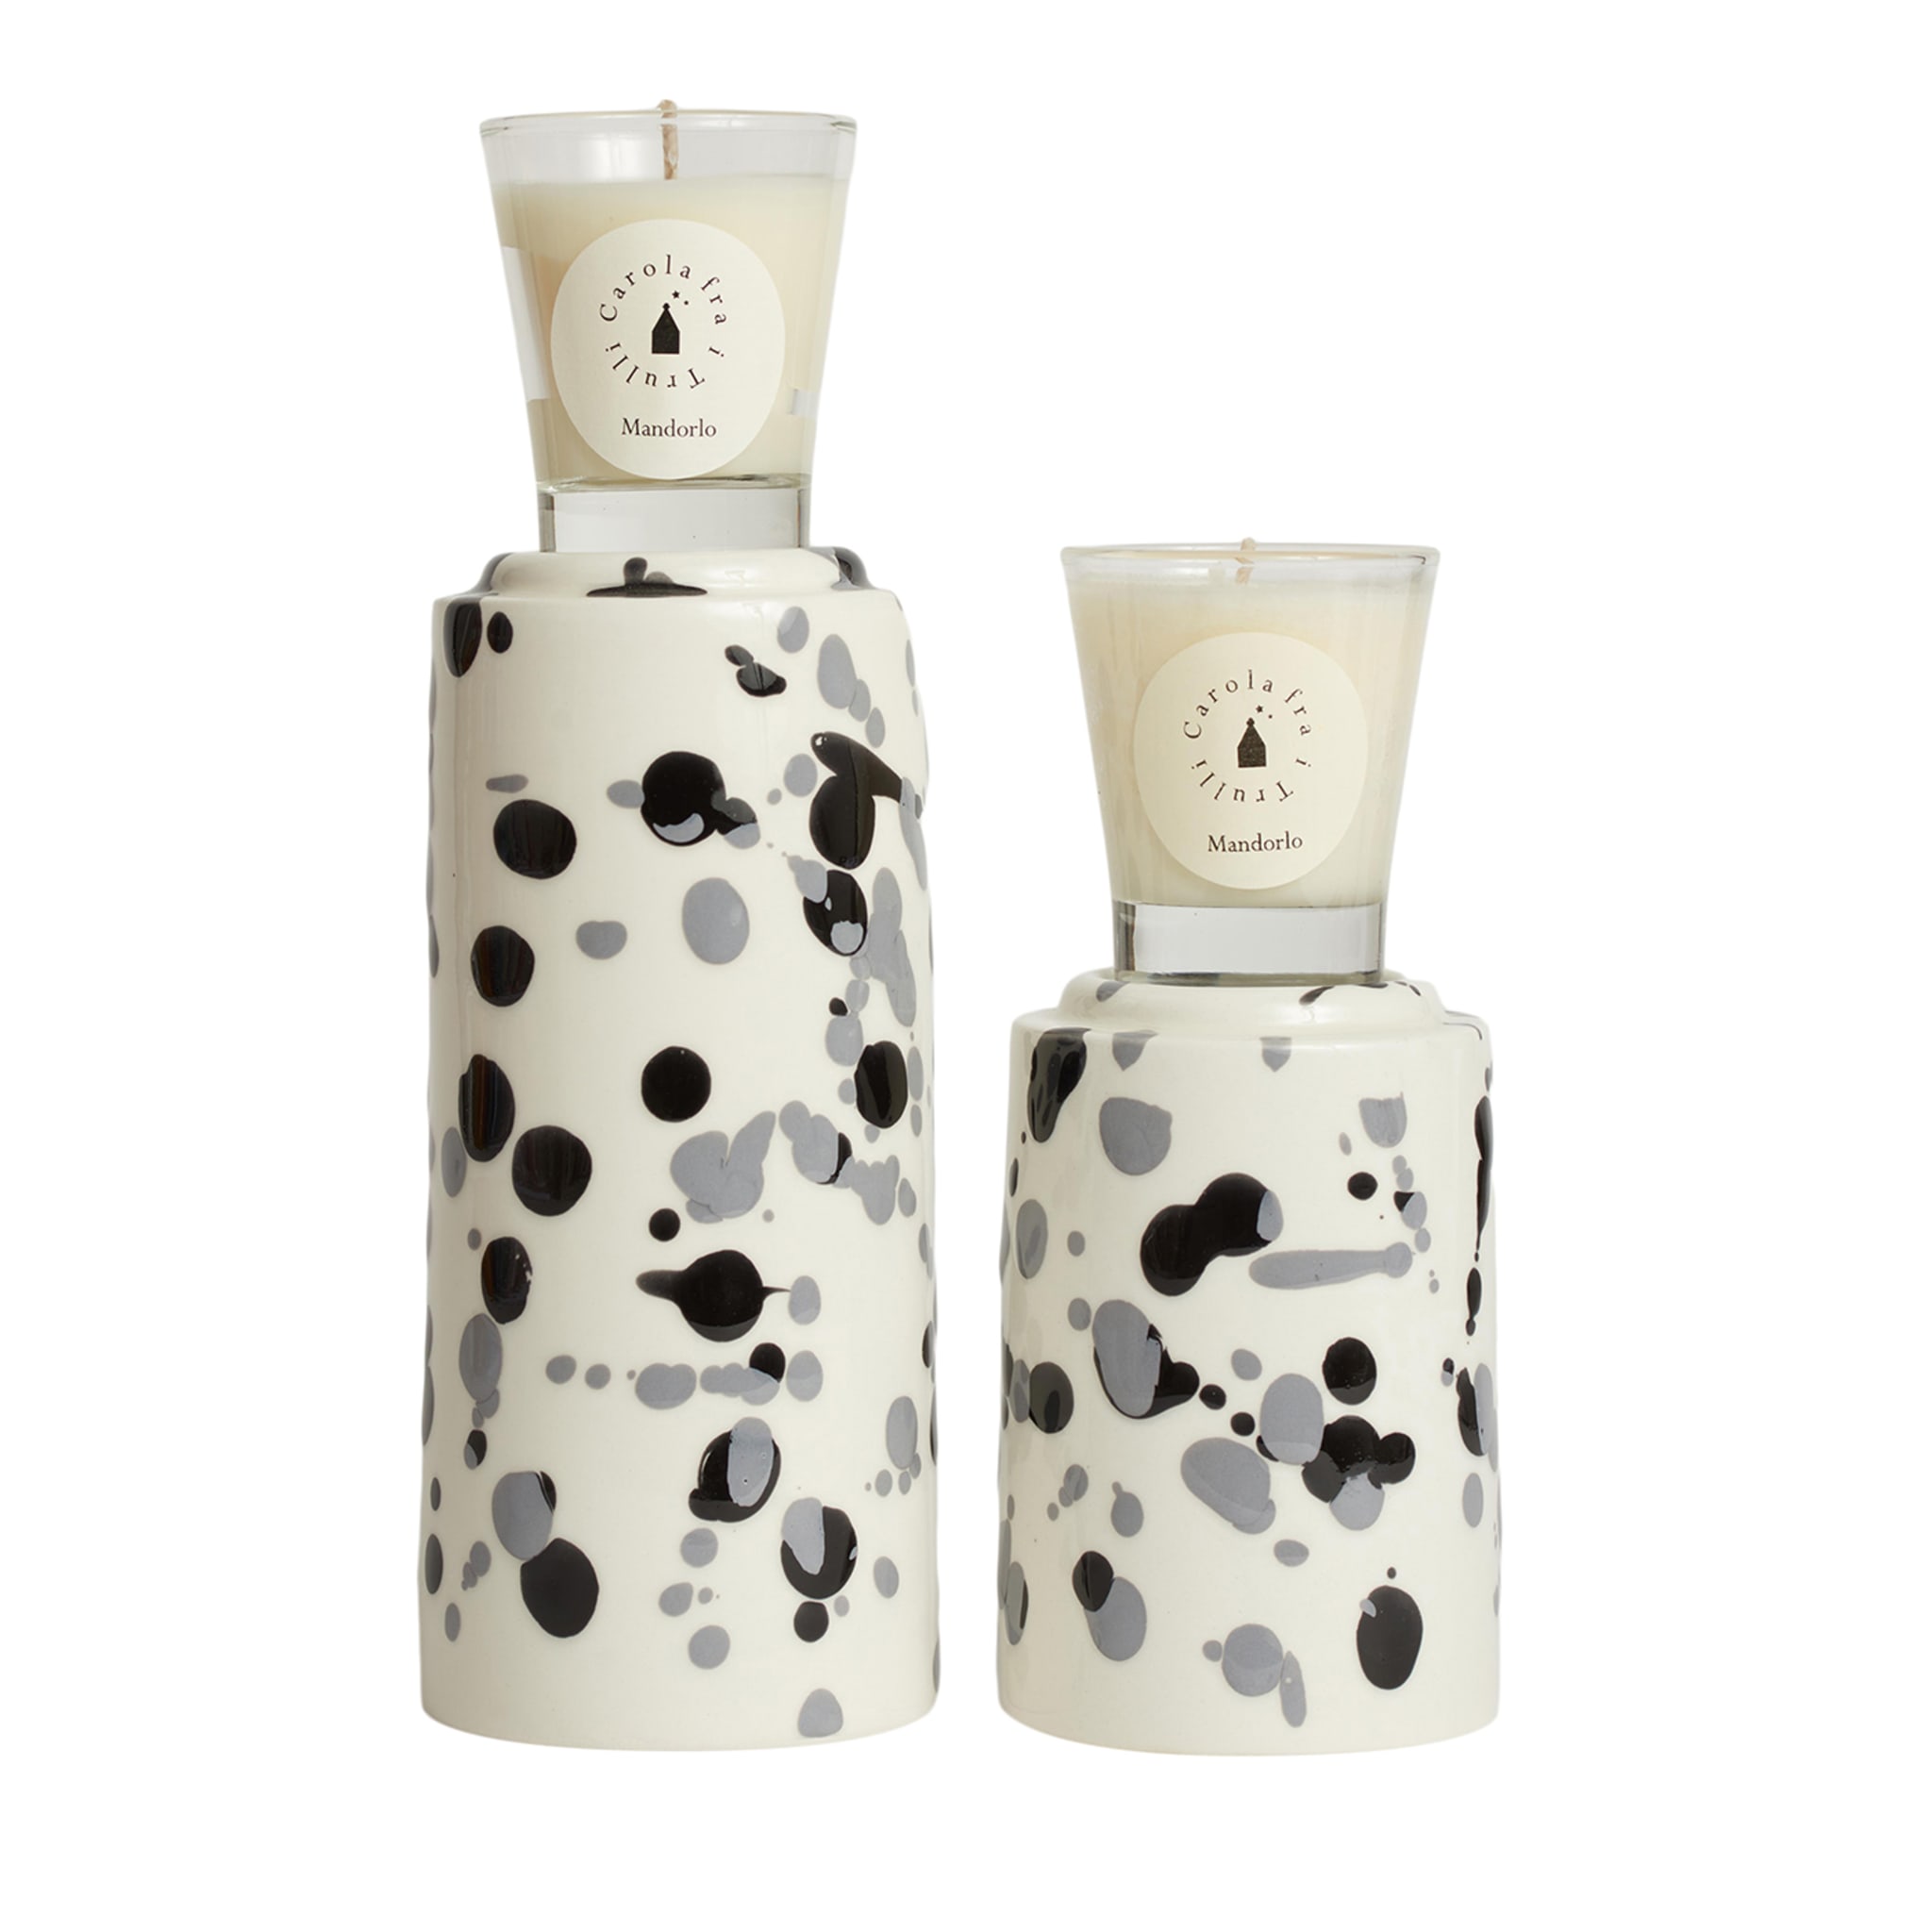 White and Black Totem with Scented Candle Fragrance Mandorlo - Main view